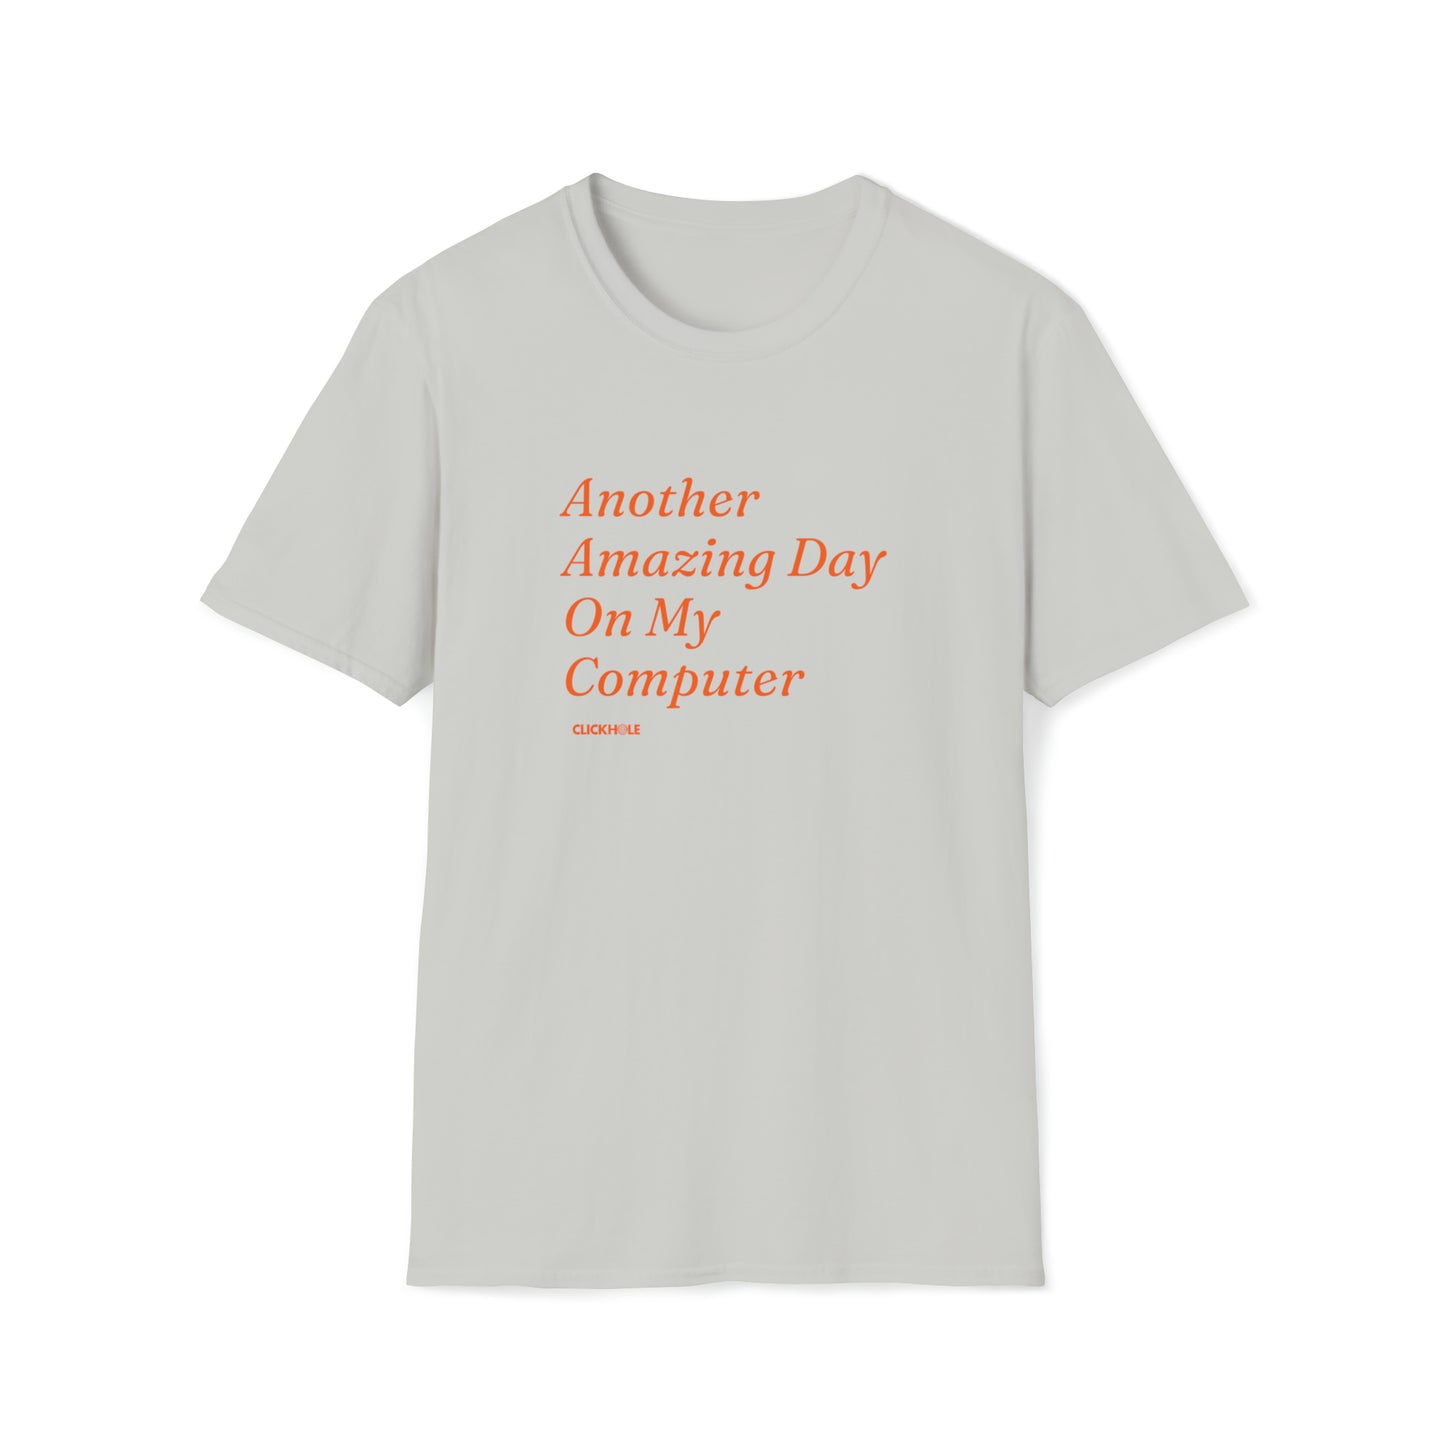 "Another Amazing Day On My Computer" Shirt